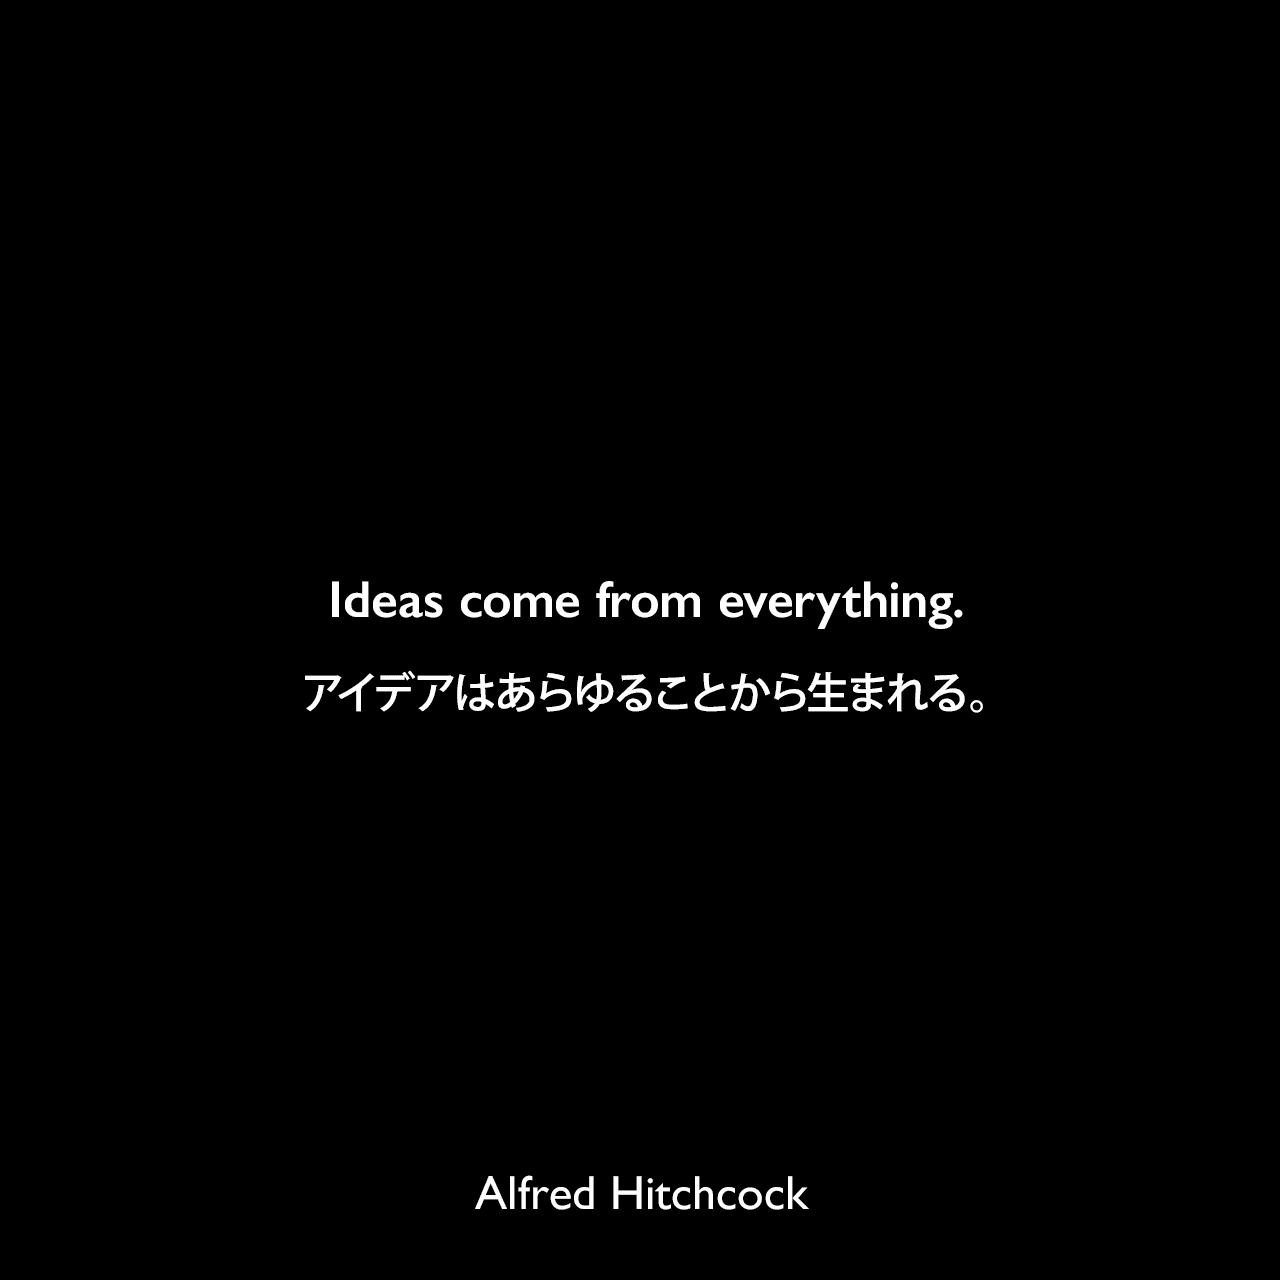 Ideas come from everything.アイデアはあらゆることから生まれる。Alfred Hitchcock